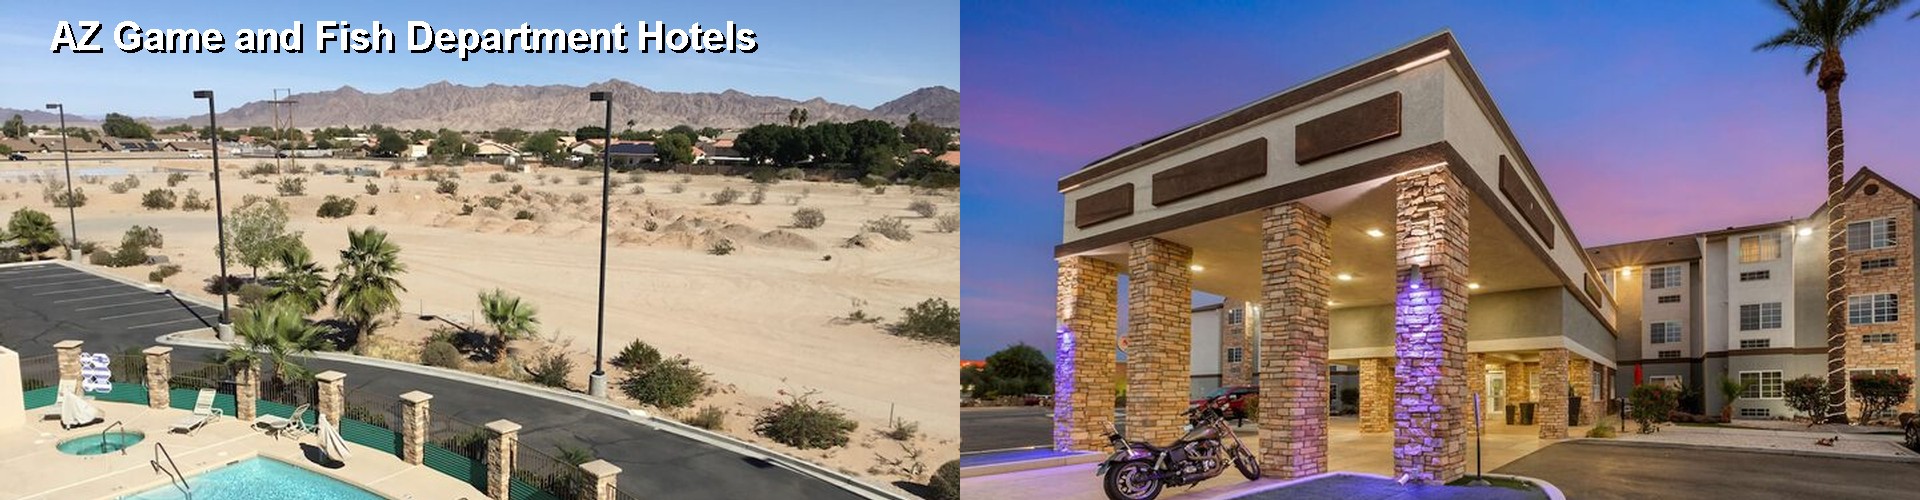 5 Best Hotels near AZ Game and Fish Department